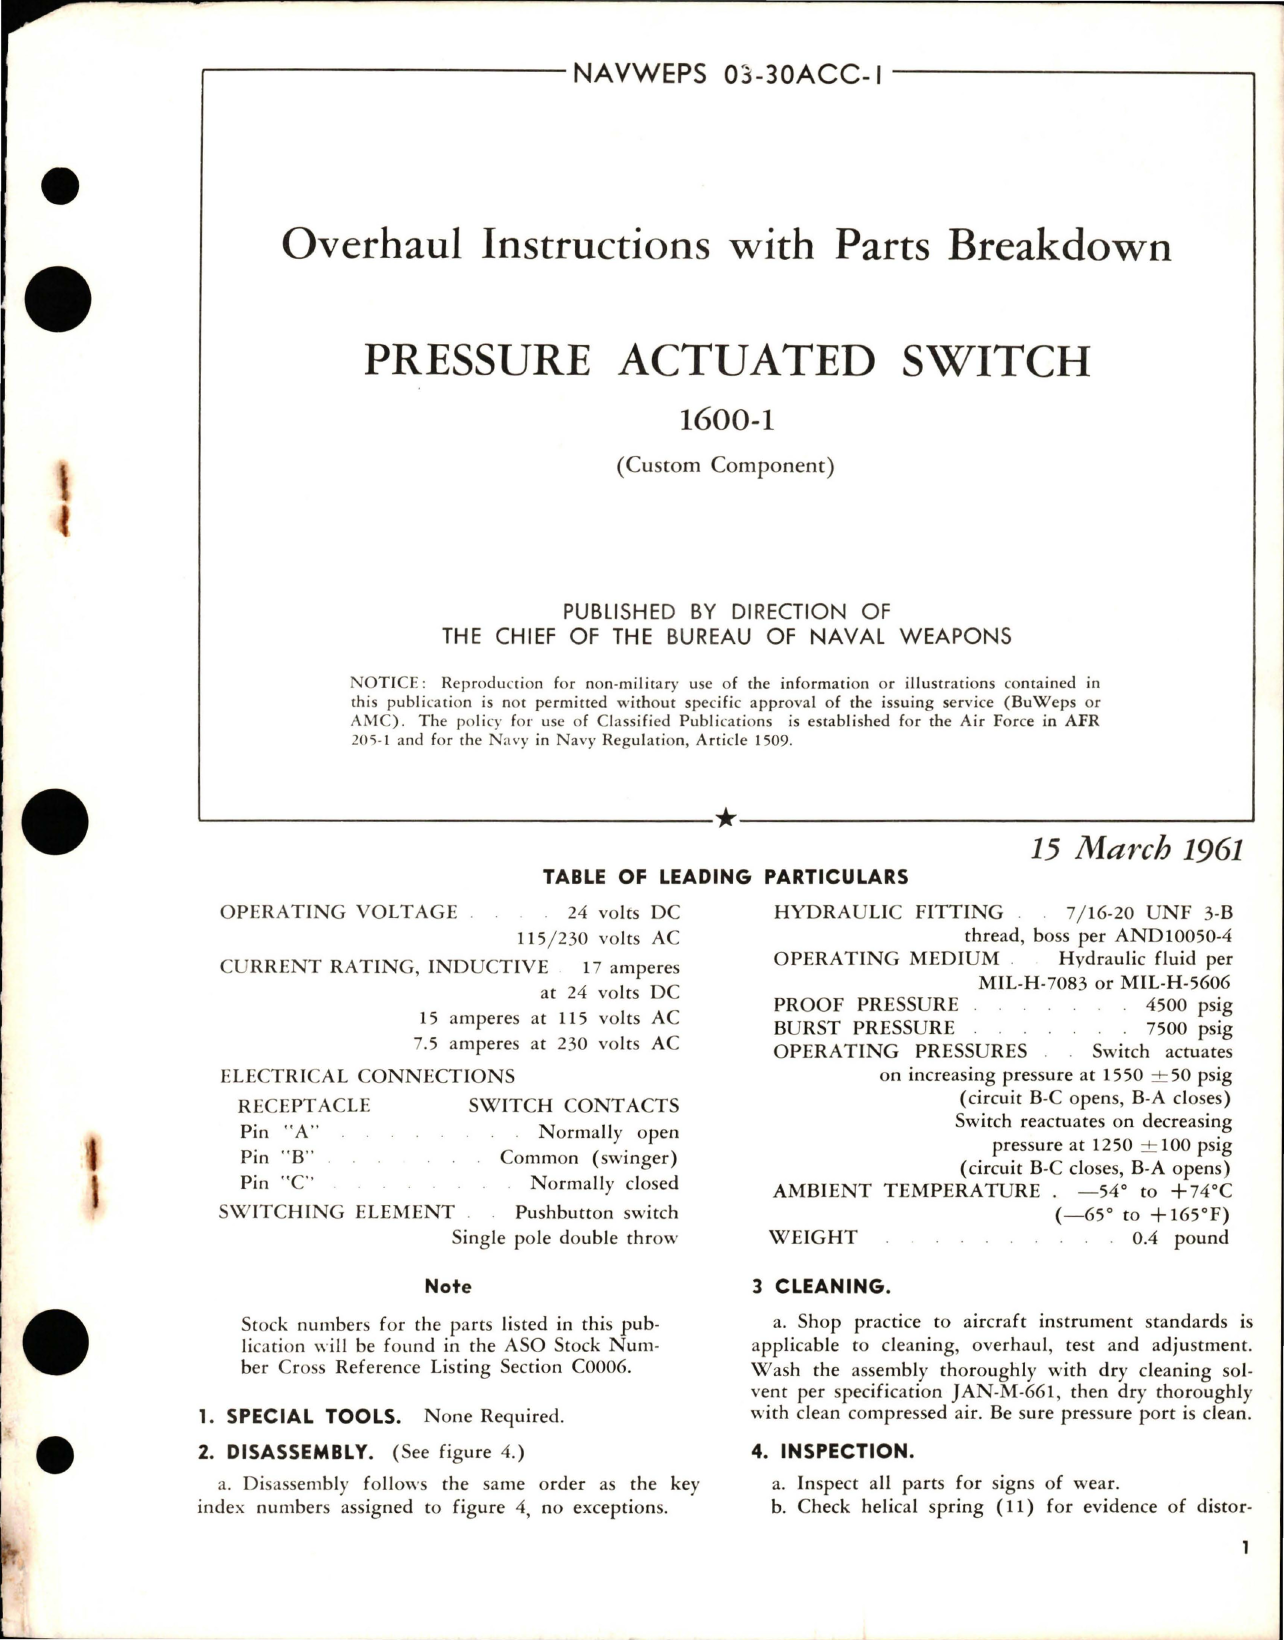 Sample page 1 from AirCorps Library document: Overhaul Instructions with Parts Breakdown for Pressure Actuated Switch - 1600-1 